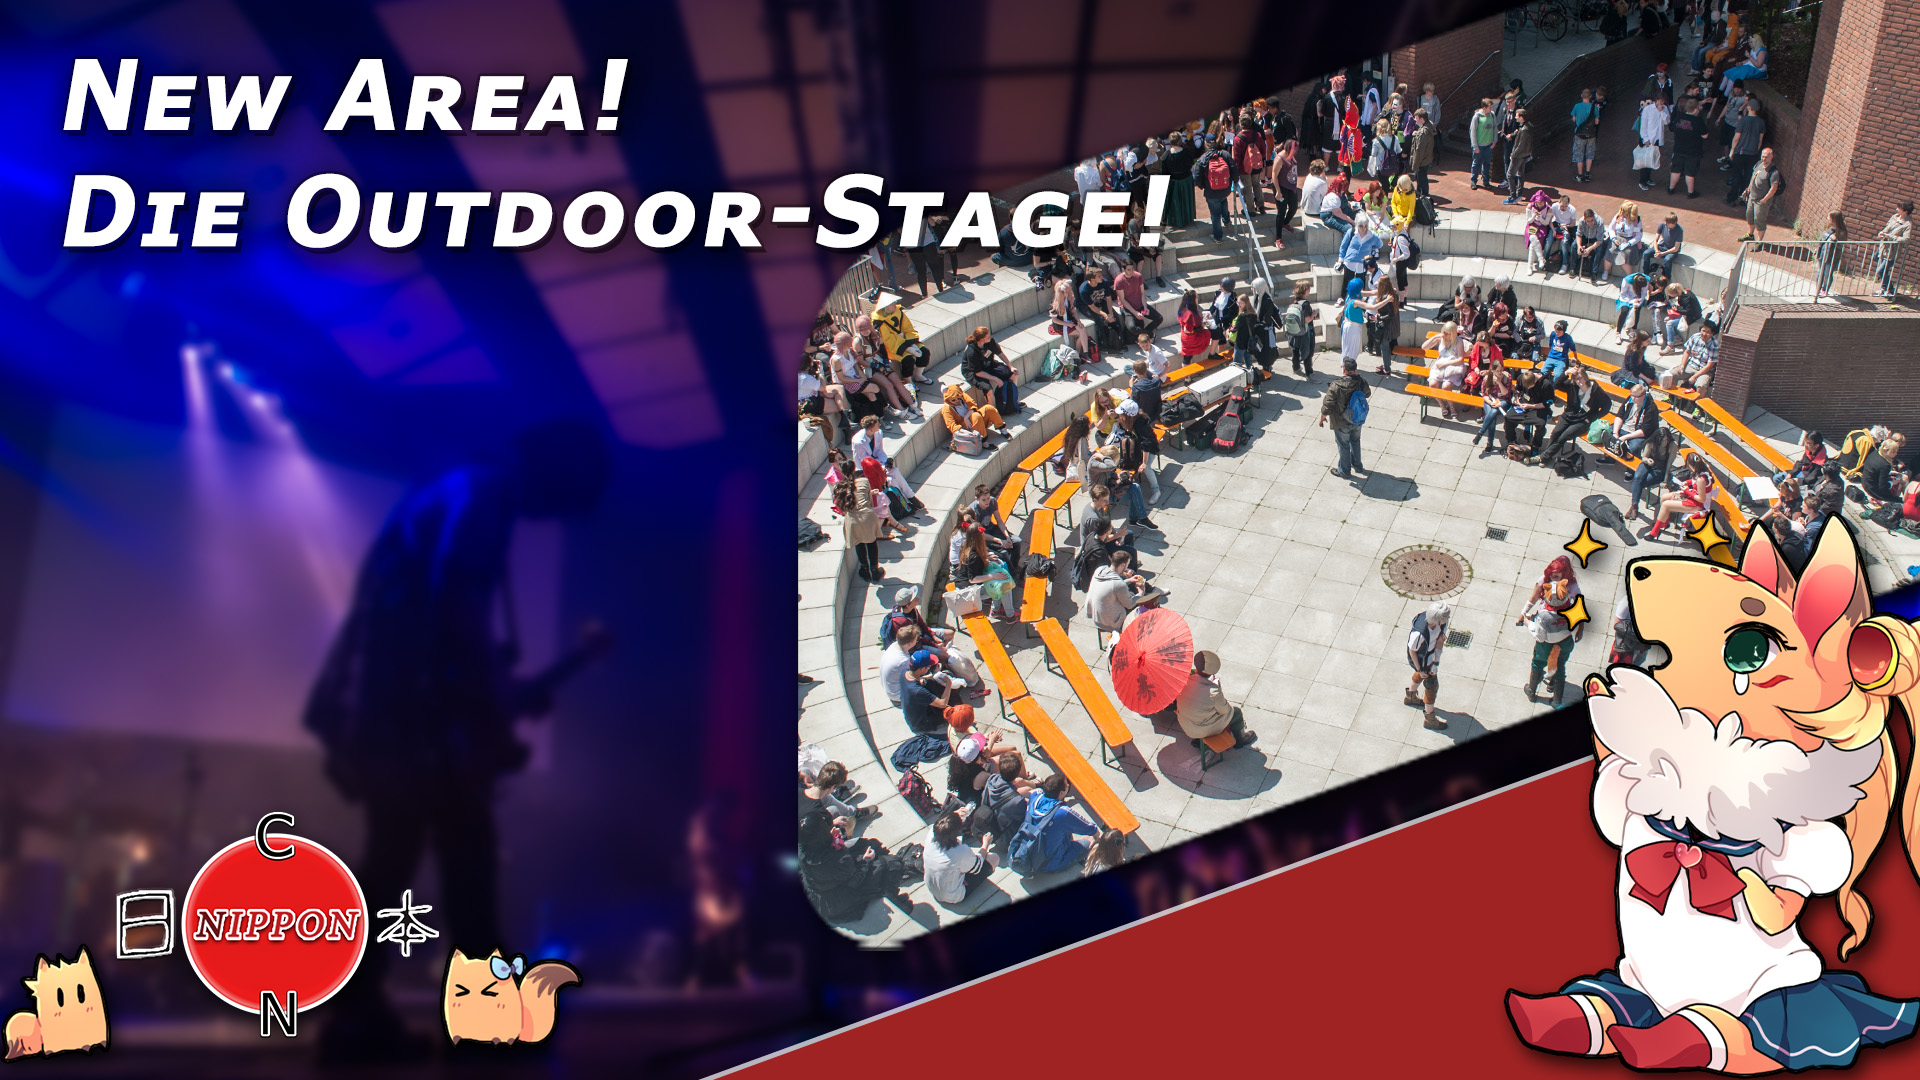 New Area! Die Outdoor-Stage.